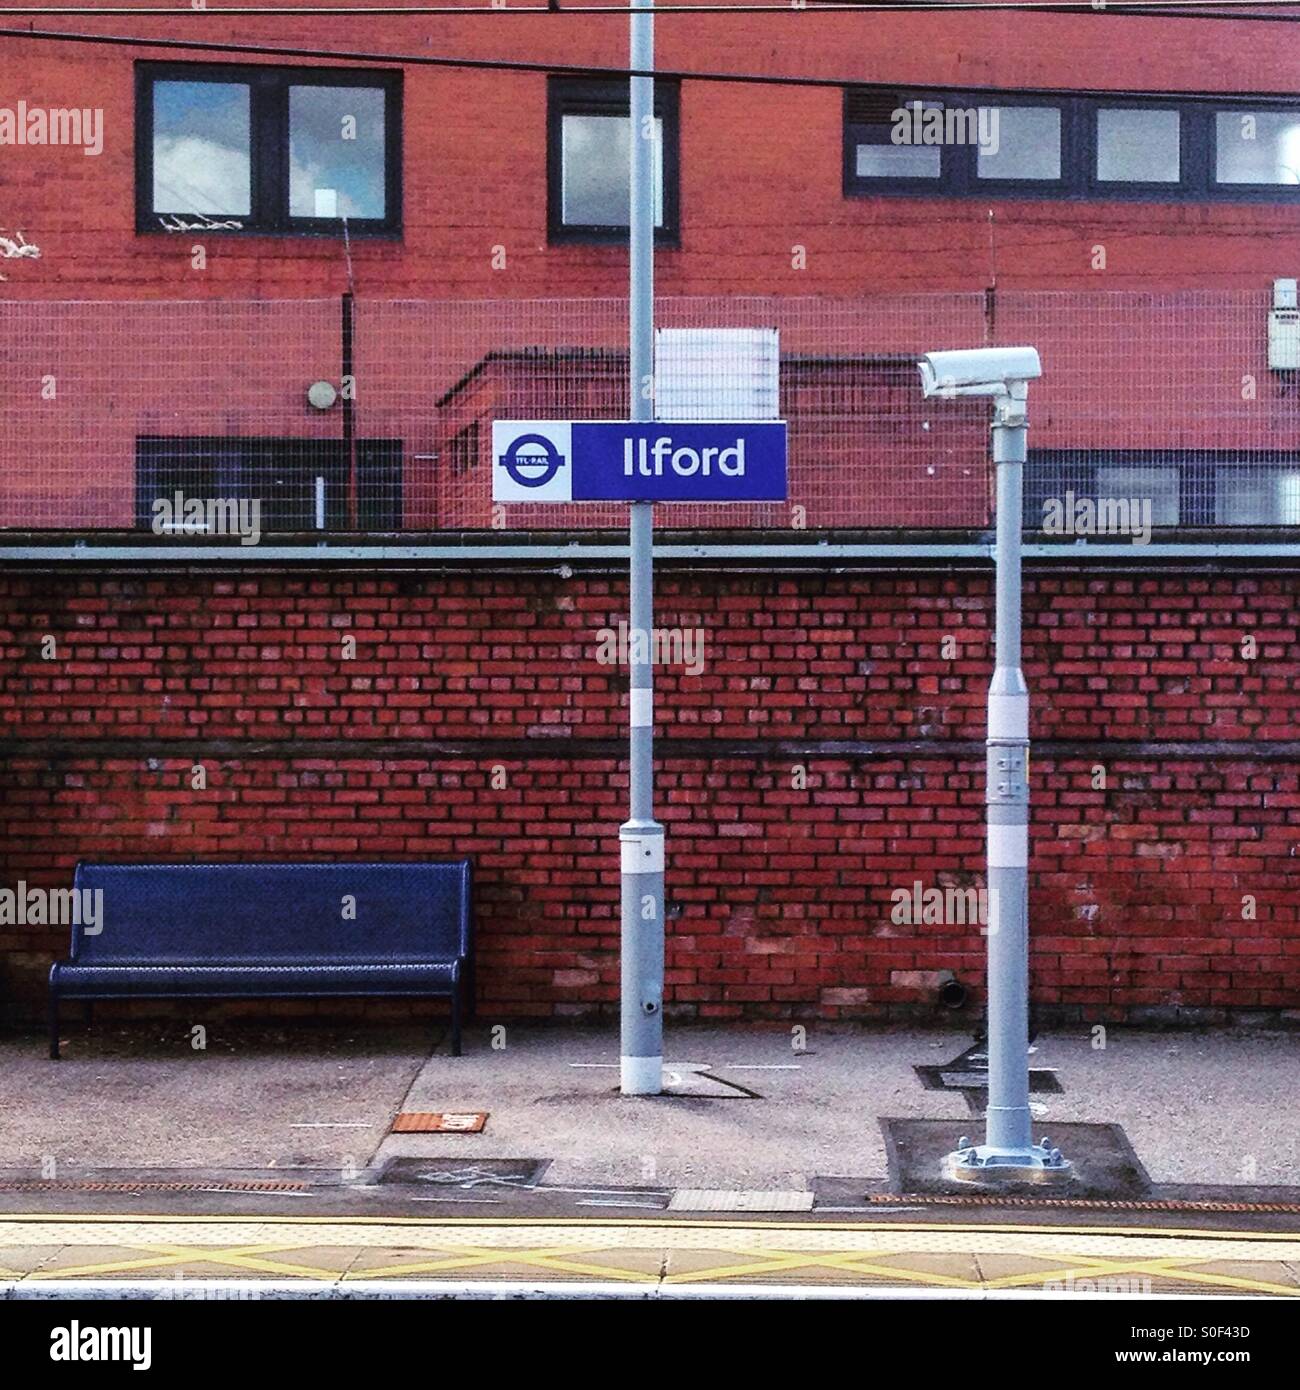 Ilford Station, new signage for TfL Rail as part of Crossrail Network upgrades. Stock Photo